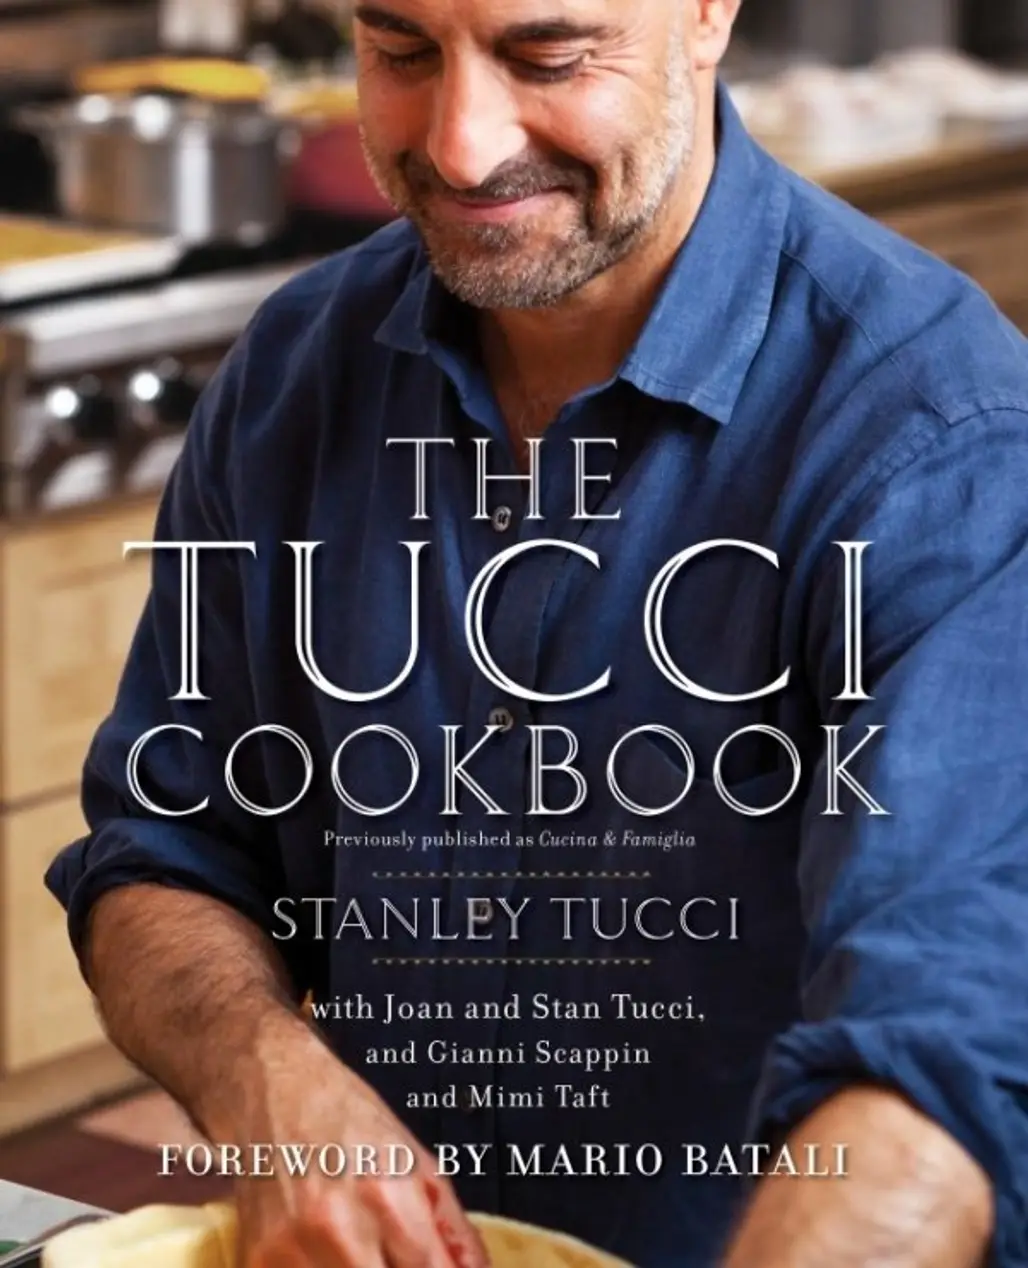 ‘the Tucci Cookbook’ by Stanley Tucci